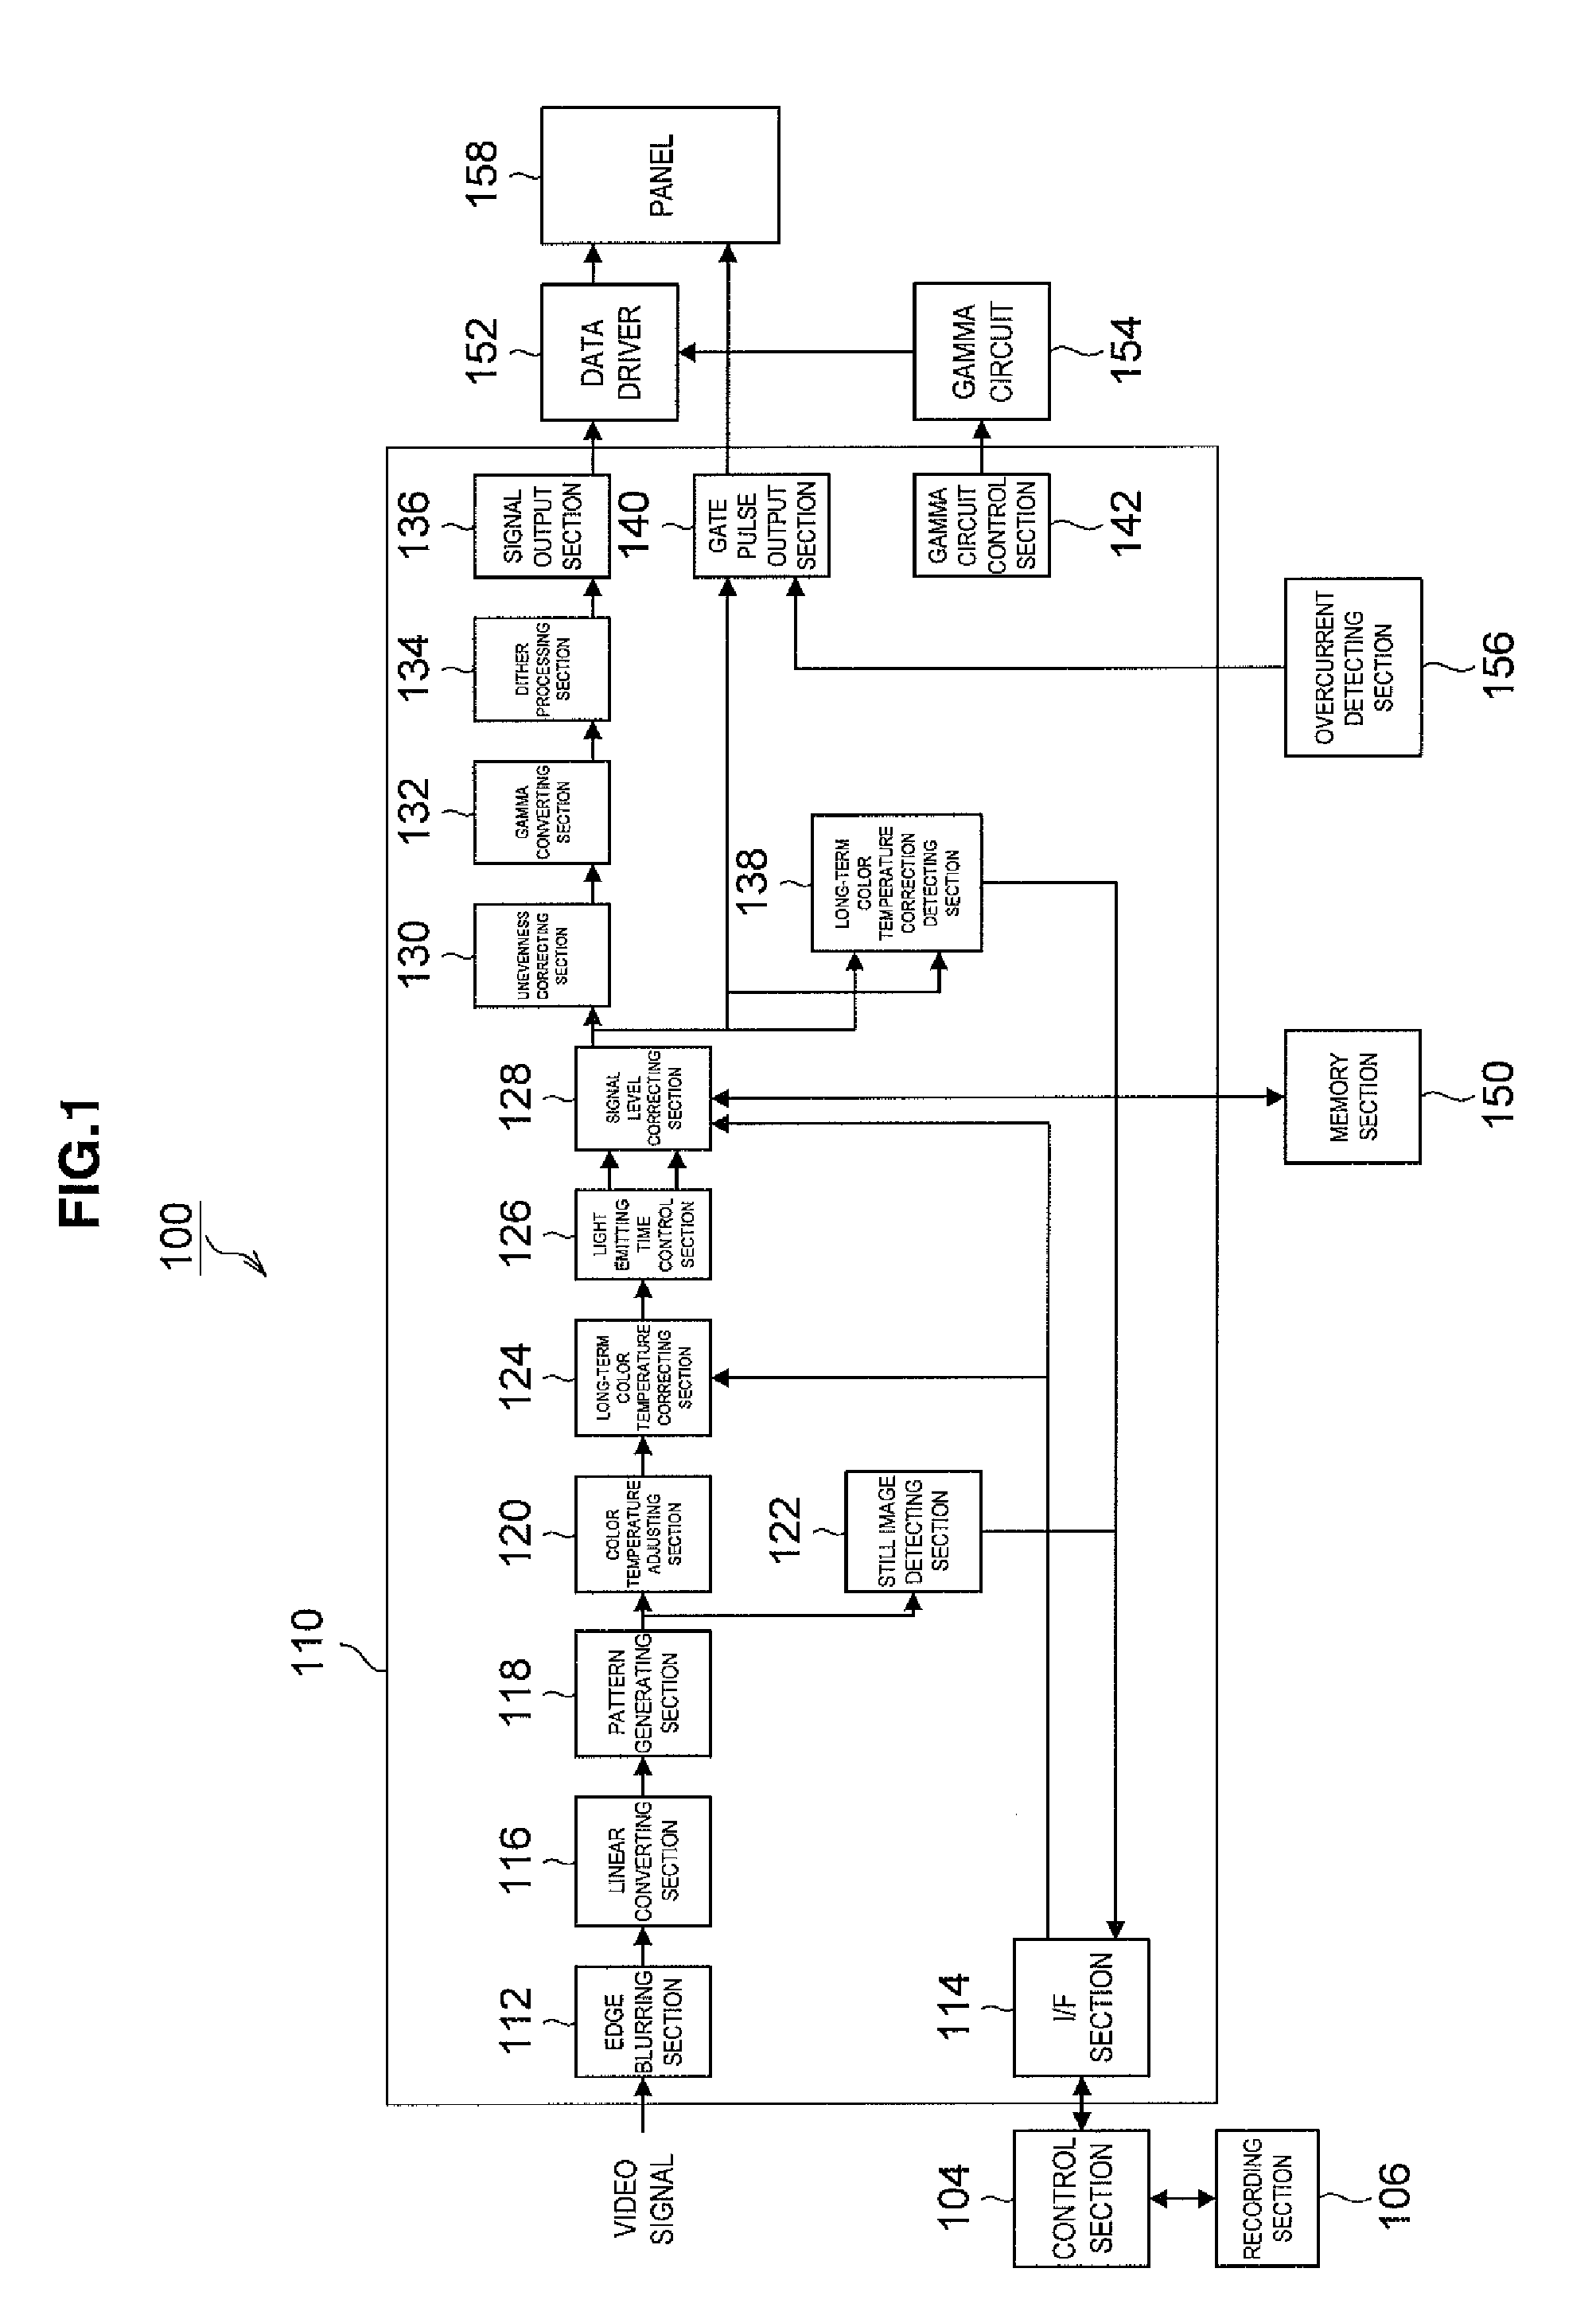 Display device, control method and computer program for display device